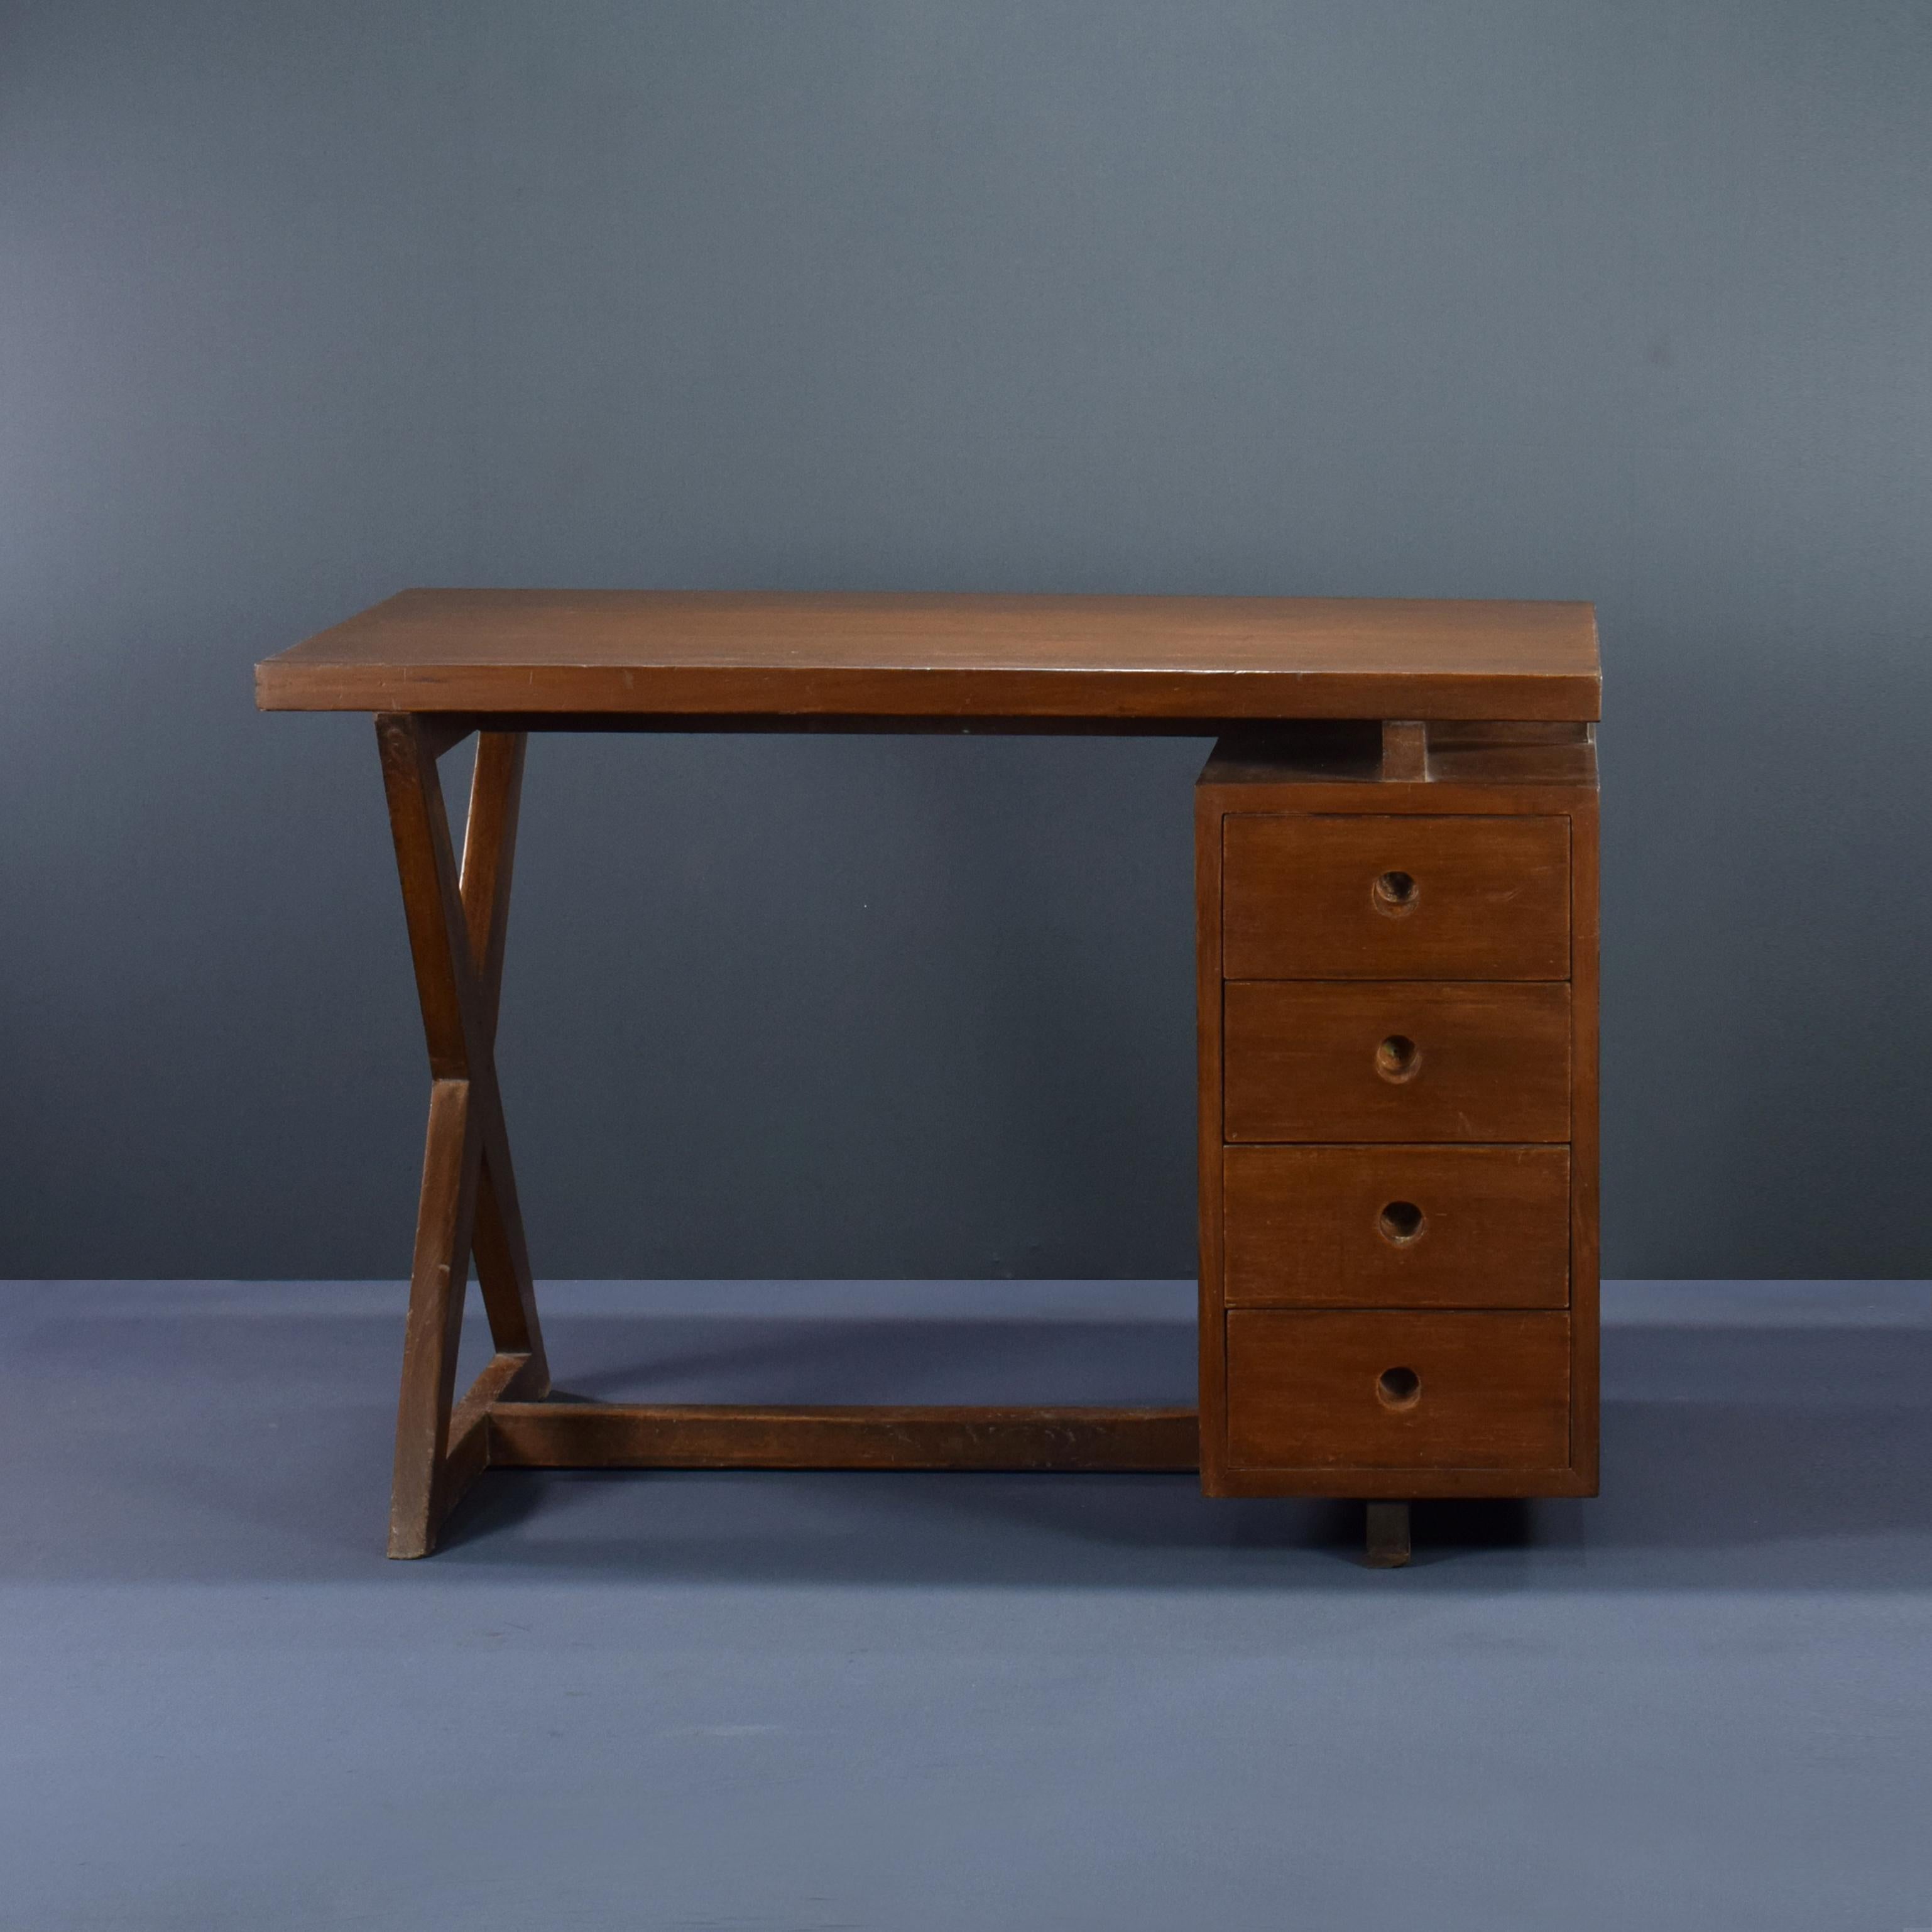 This desk is raw in its simplicity, embodying an expressing the pure ideas of Pierre Jeanneret. It is a very strong piece which I love very much, it’s limited to the elements it needs: drawers, top and an X-leg to hold the second side of the desk.